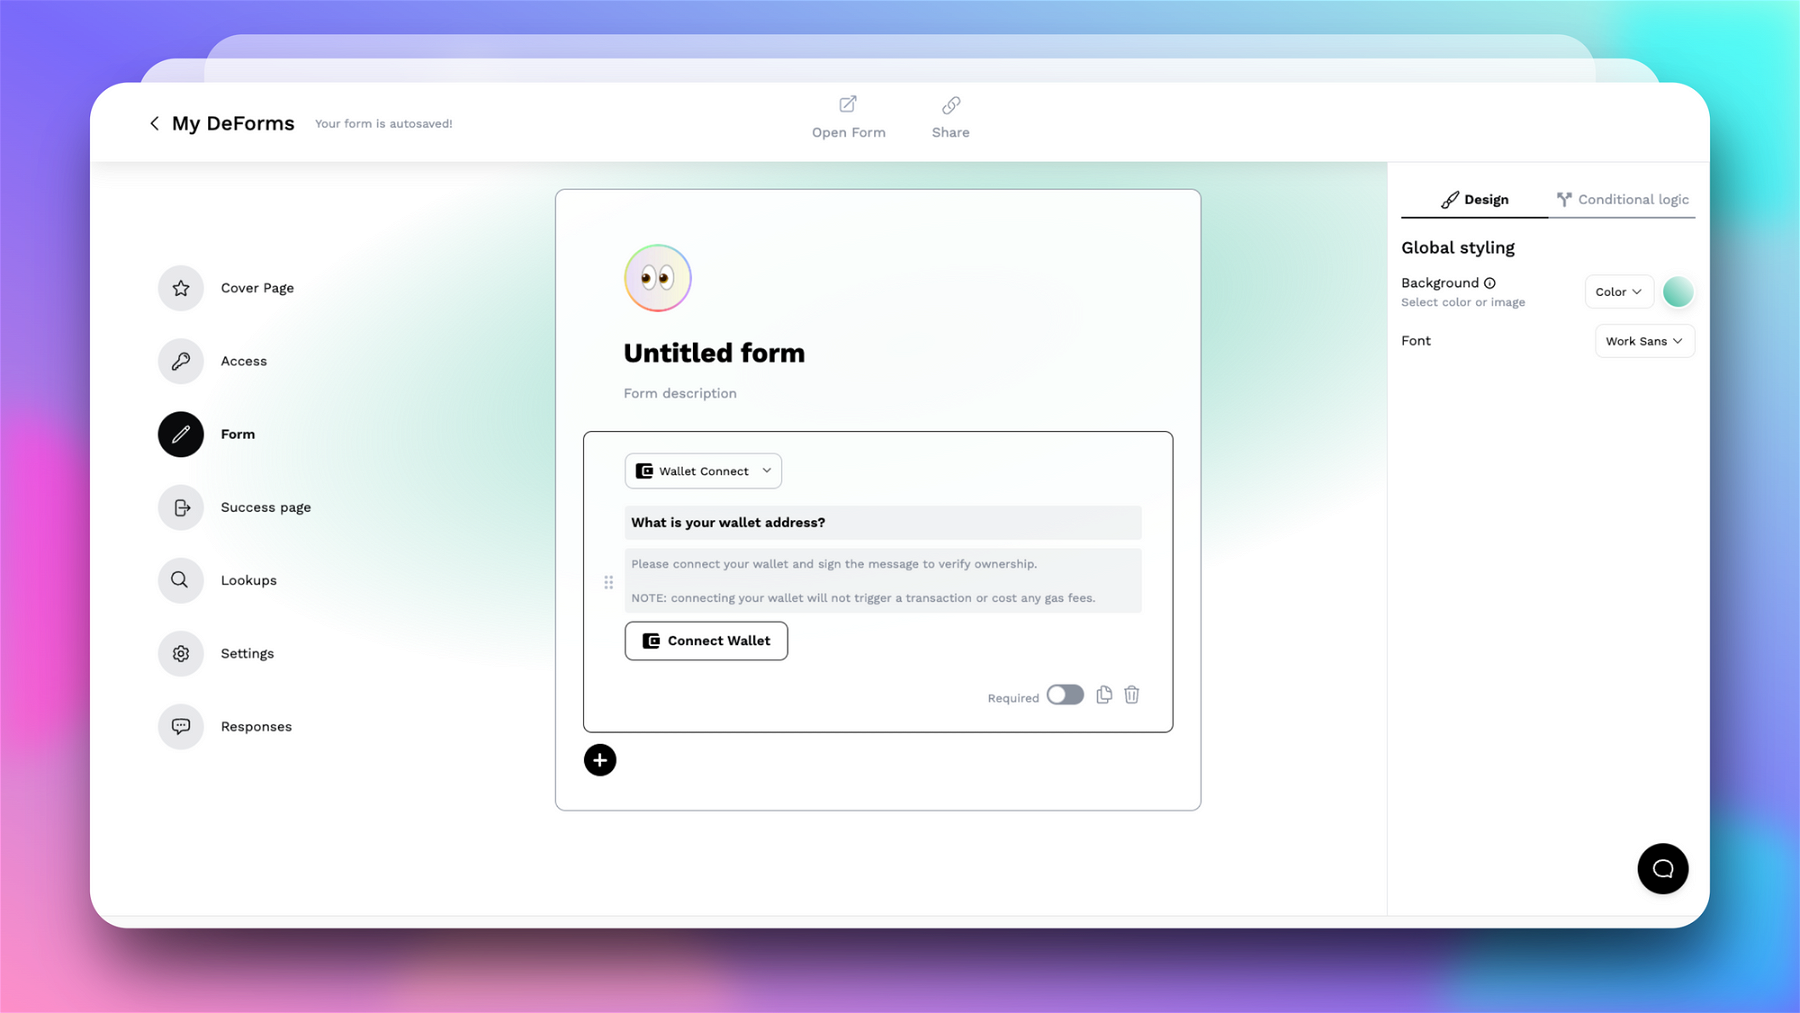 When you create a new form, you’ll be able to start customizing its details. By default, it will be labeled as an Untitled form. You can read more about the available customizations below.